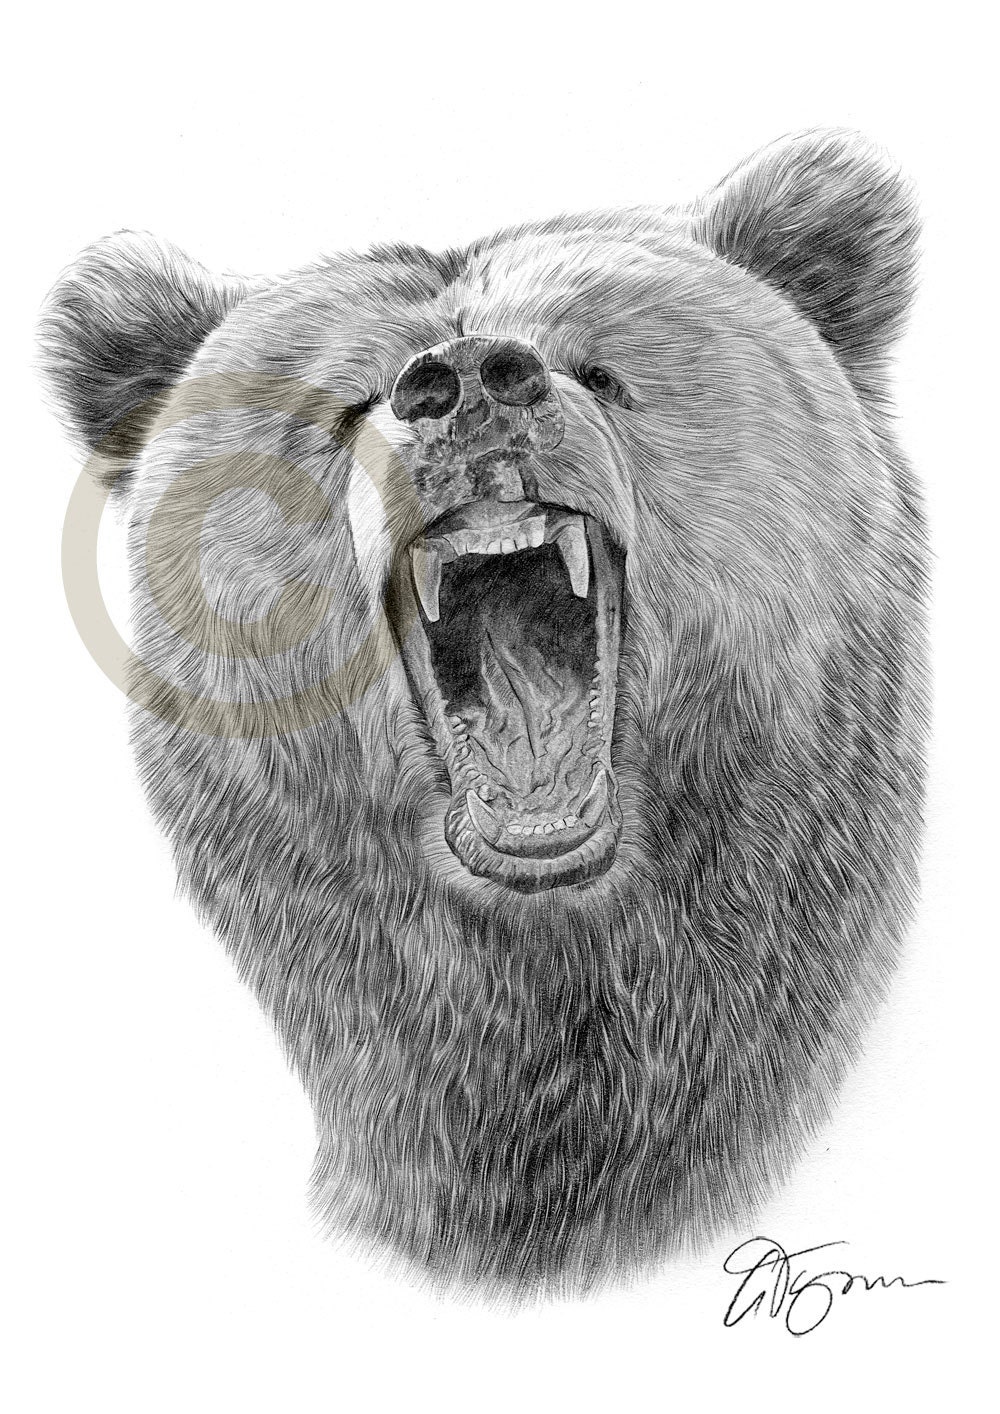 Angry Grizzly Bear pencil drawing print A4 by GaryTymonArtwork